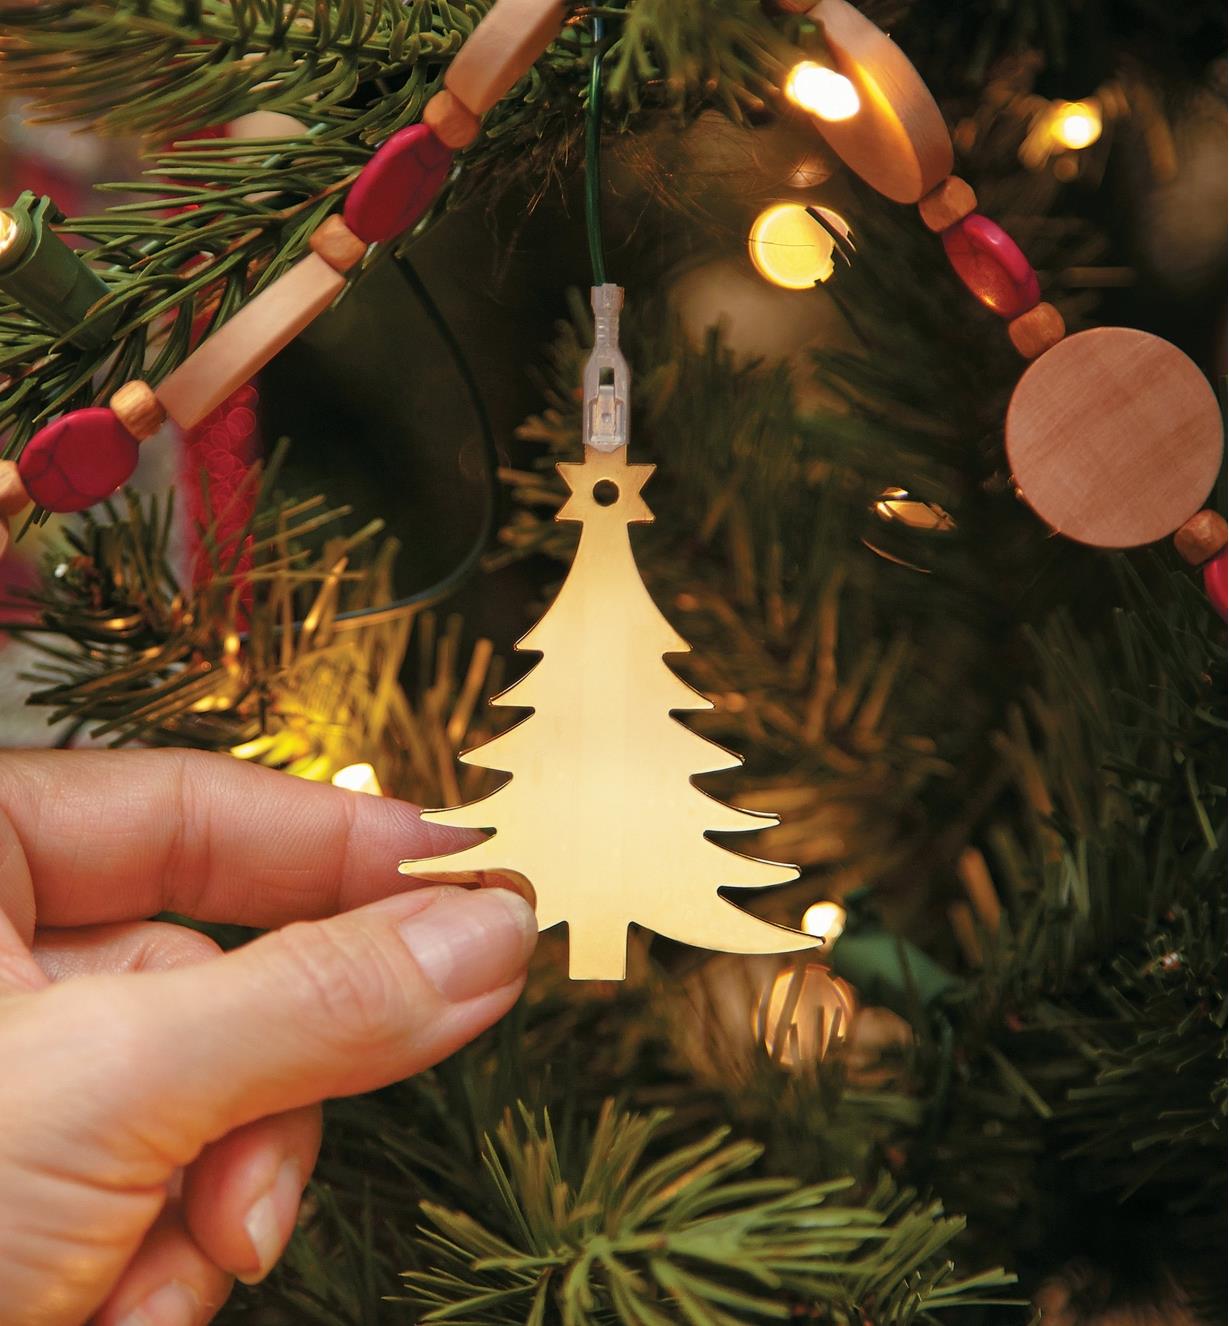 Touch Control for Christmas Lights hanging on a decorated tree